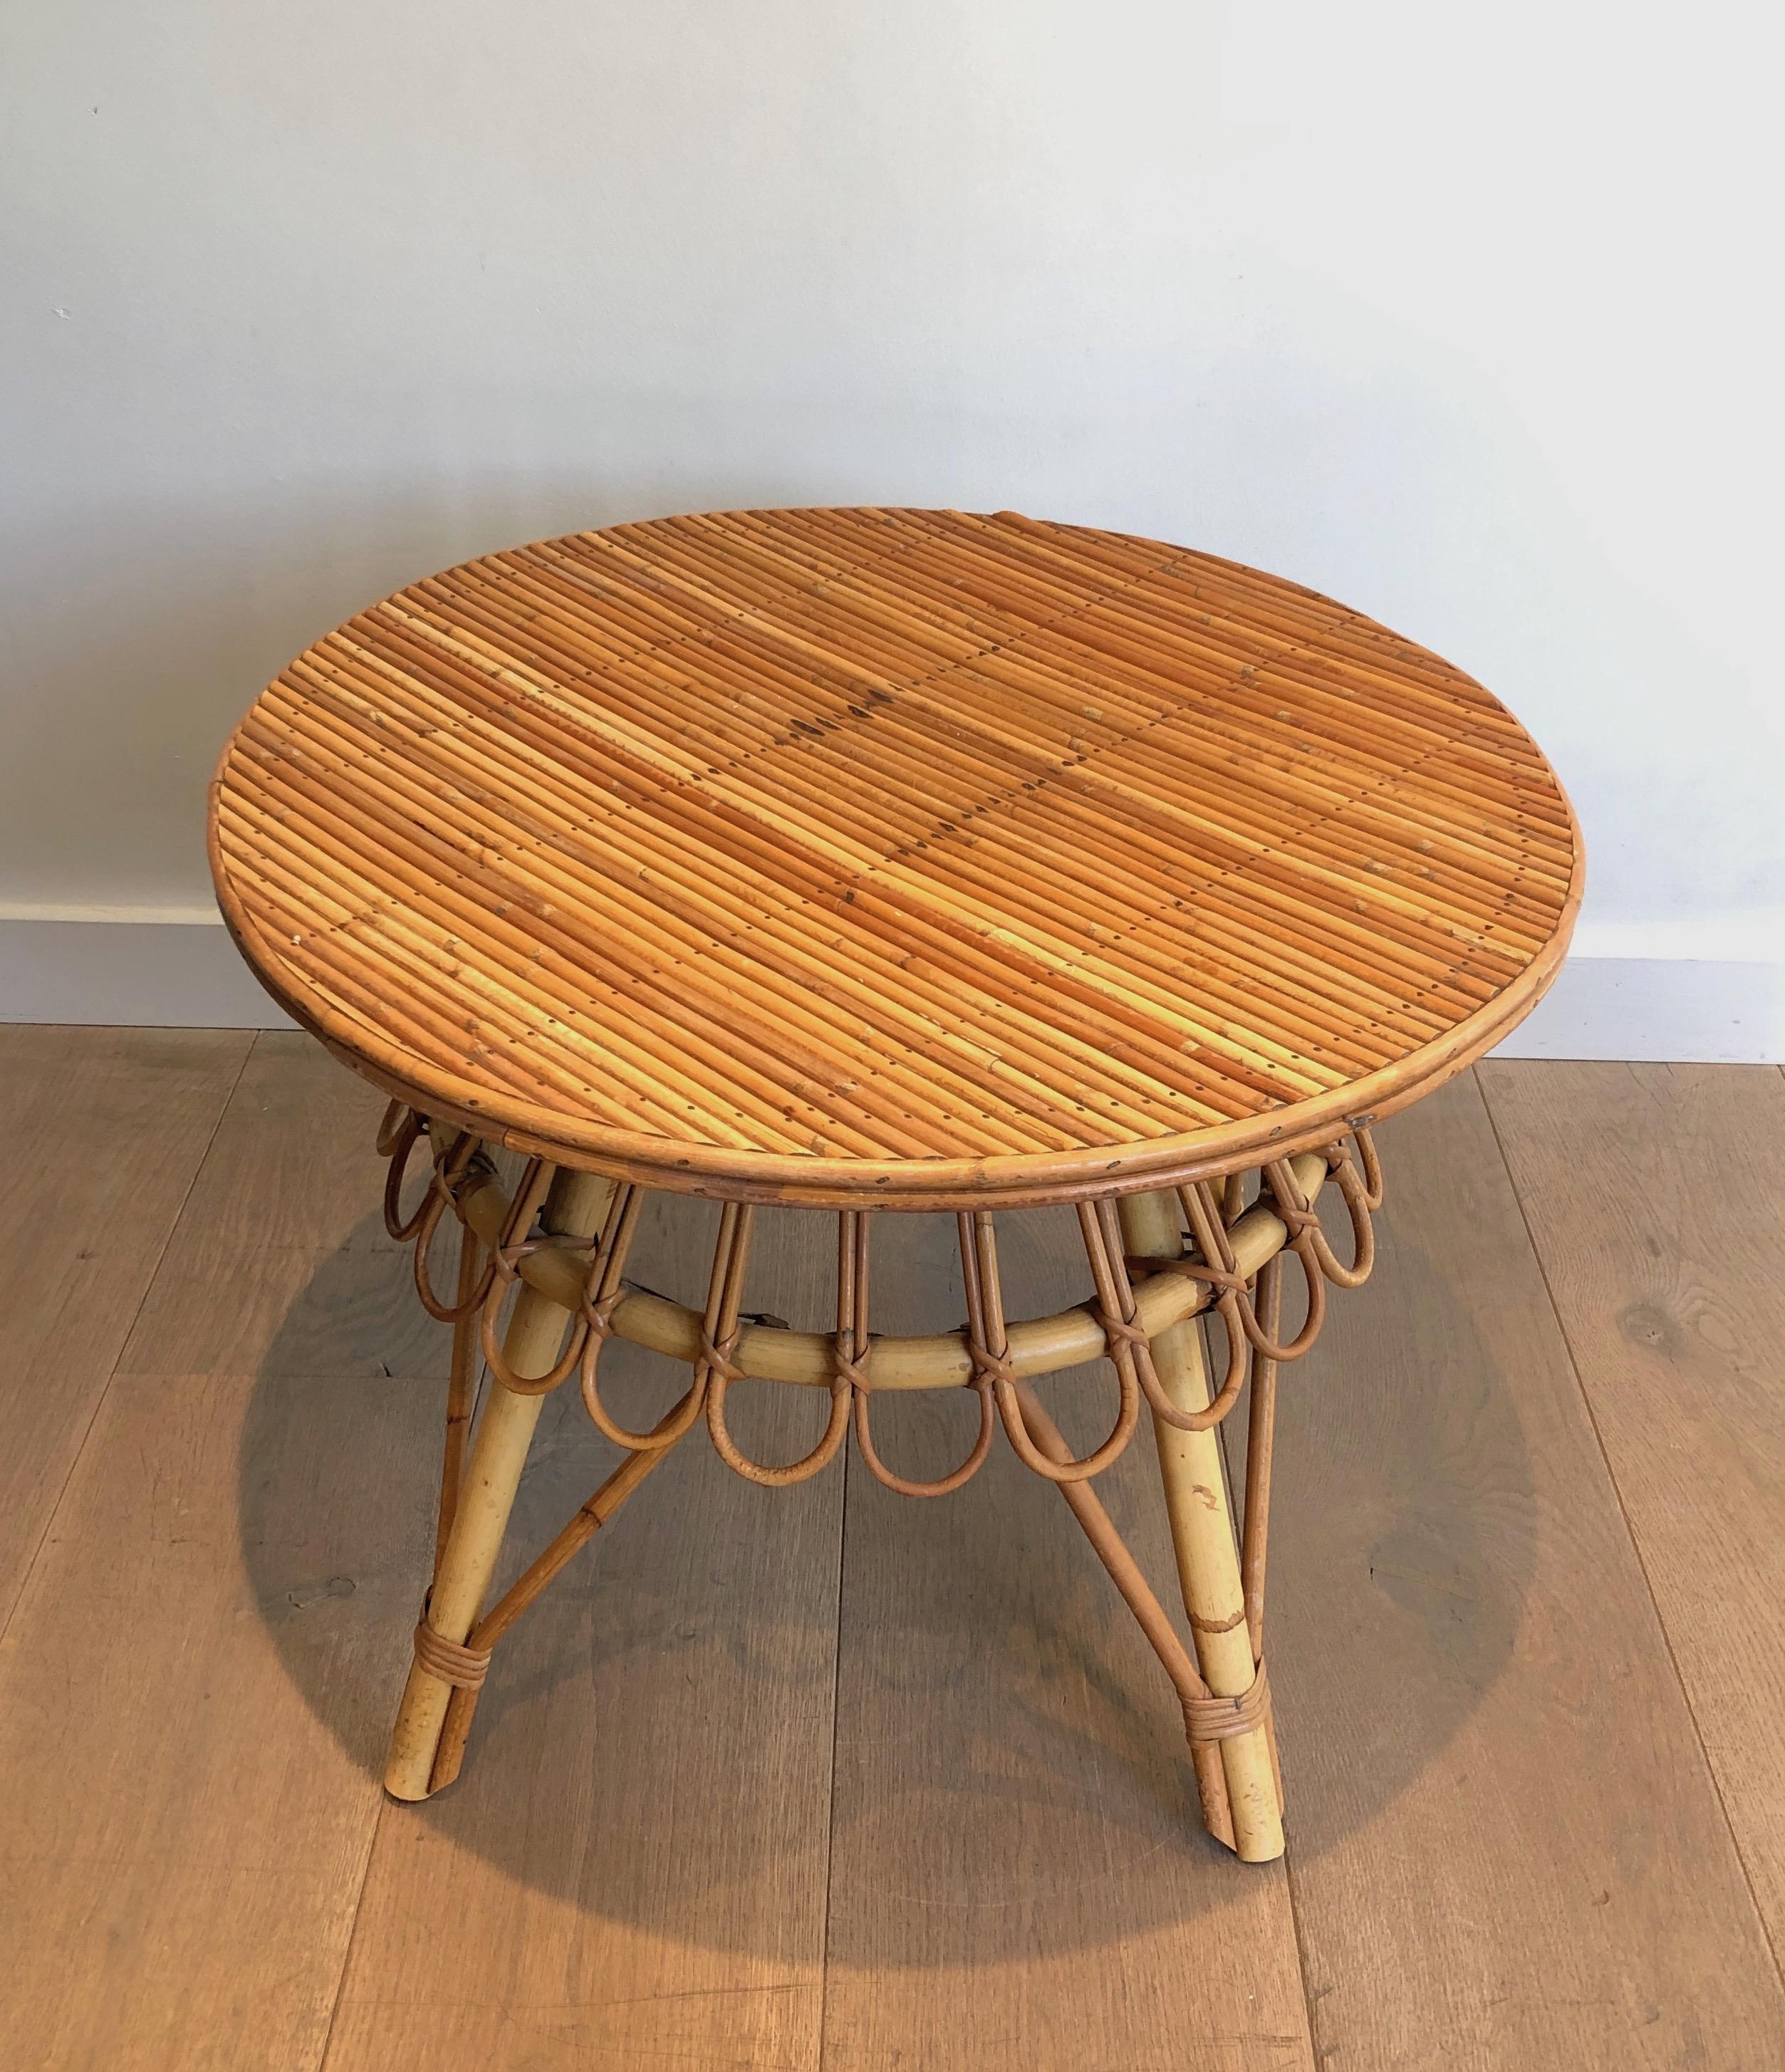 This round rattan coffee table is French. Thi is a work attributed to Adrien Audoux and Frida Minet. Vers 1950. Circa 1950.